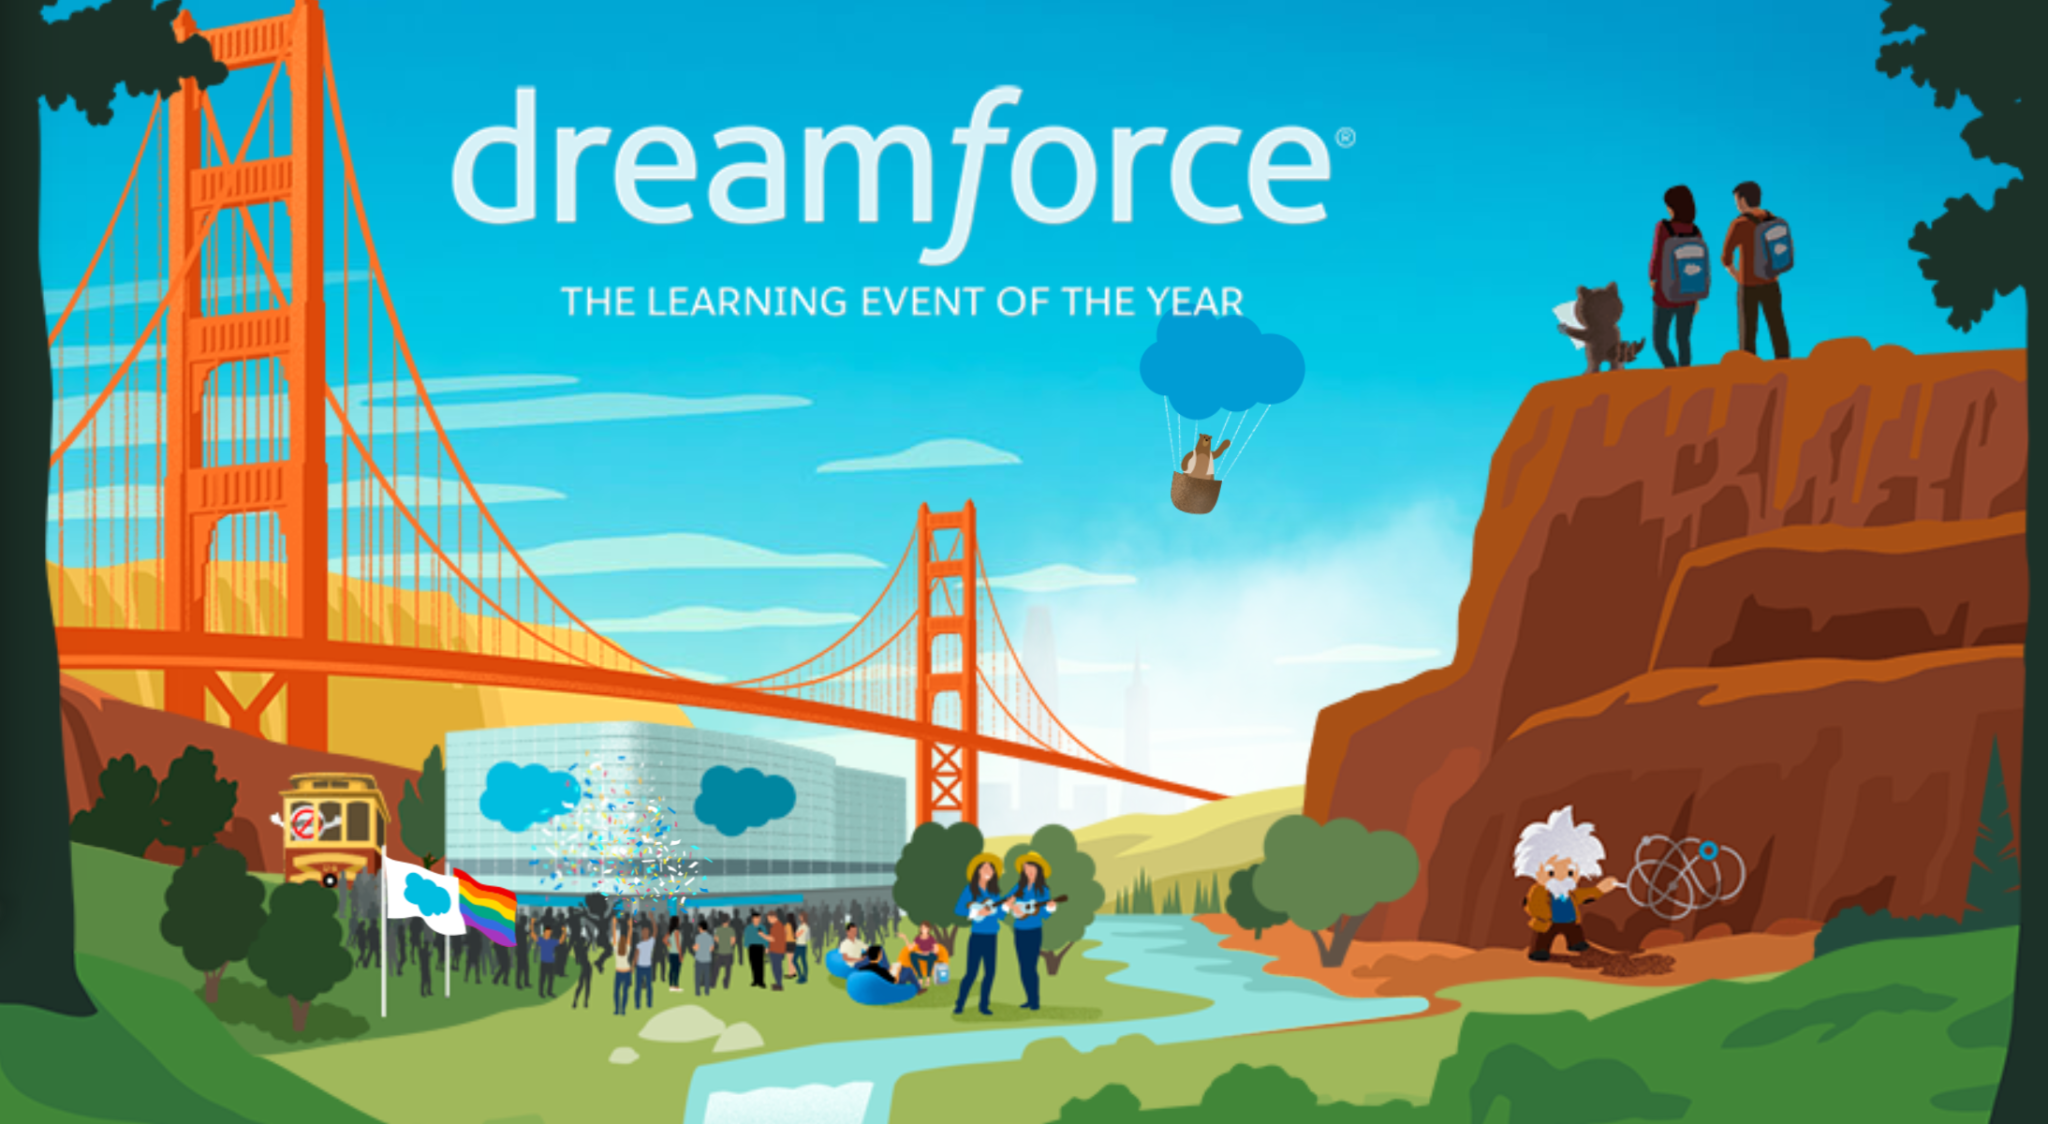 Our 3rd Dreamforce conference! Data Orchestra